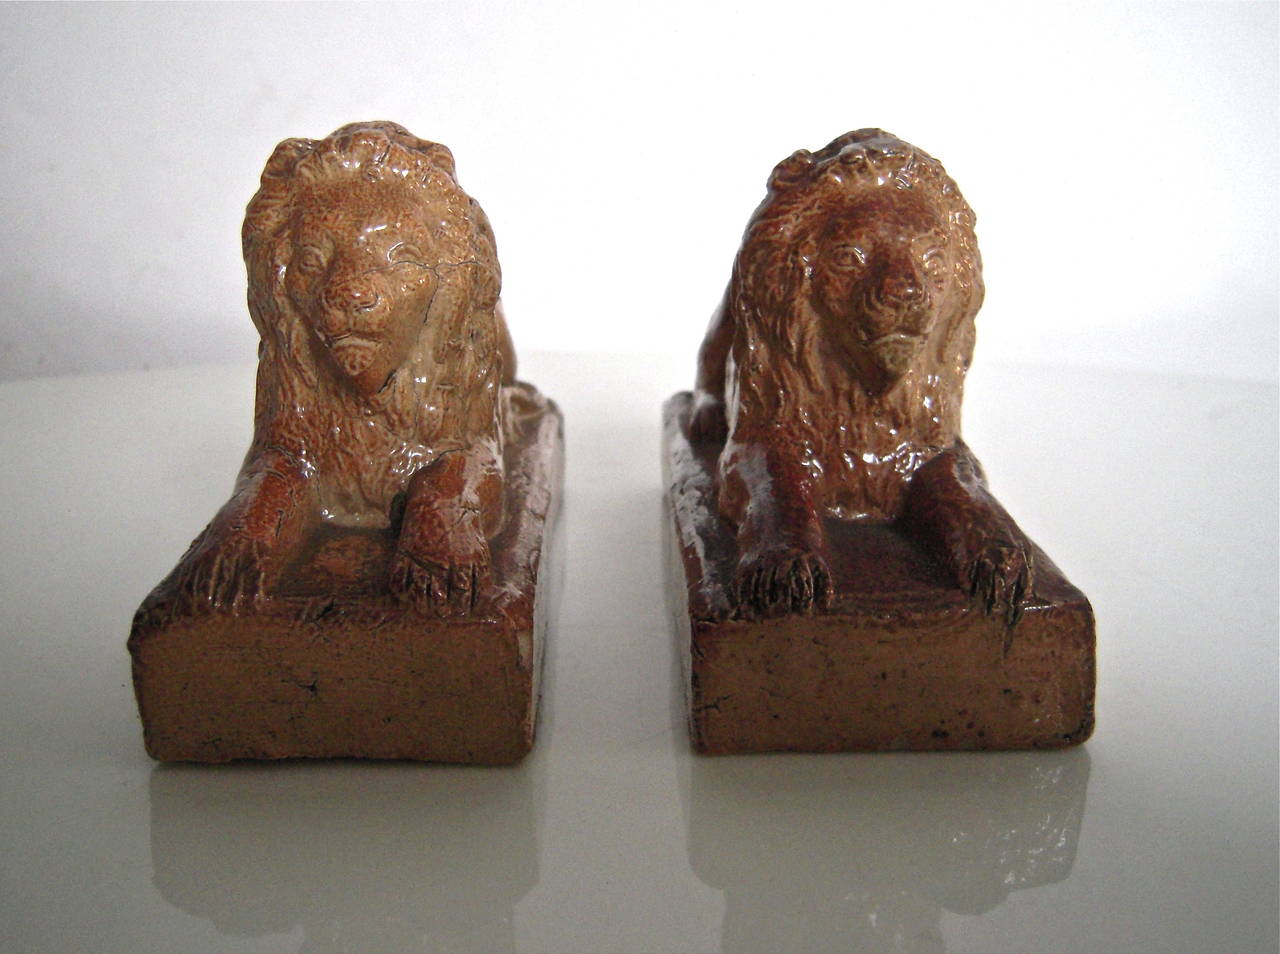 A pair of small 19th century English stoneware recumbent lions, on rectangular plinths, in glazed earthenware. Beautiful on a fireplace mantel or table.